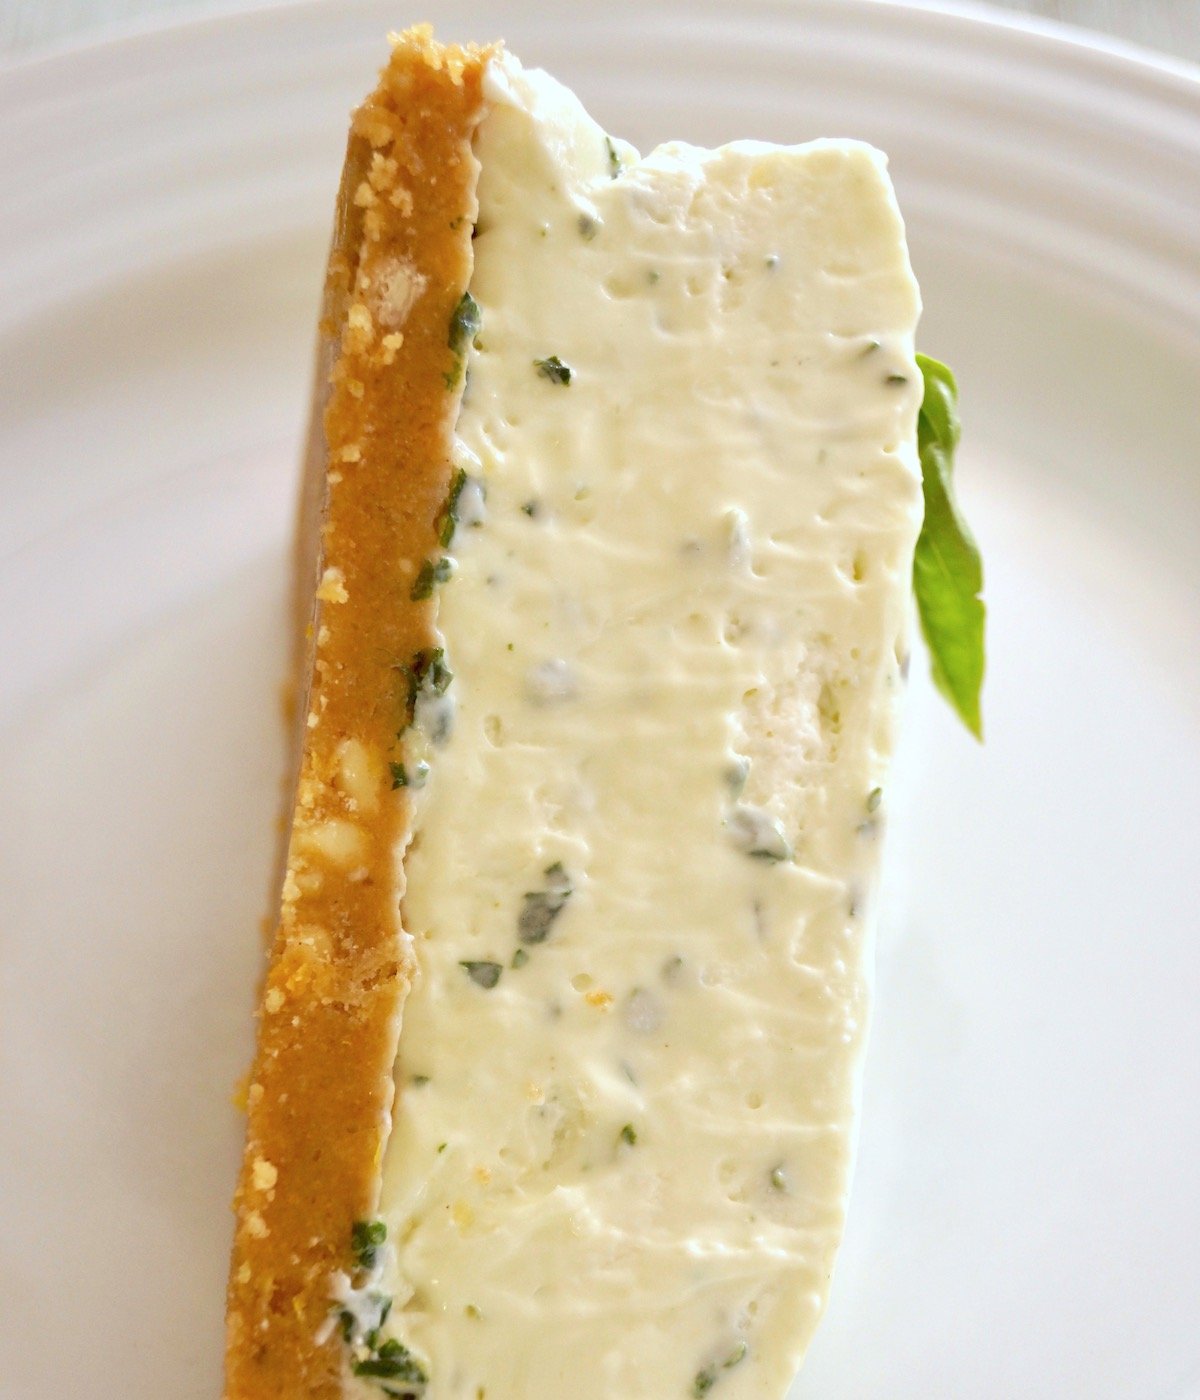 One slice of a basil cheesecake with a small basil sprig on its side on a white plate.